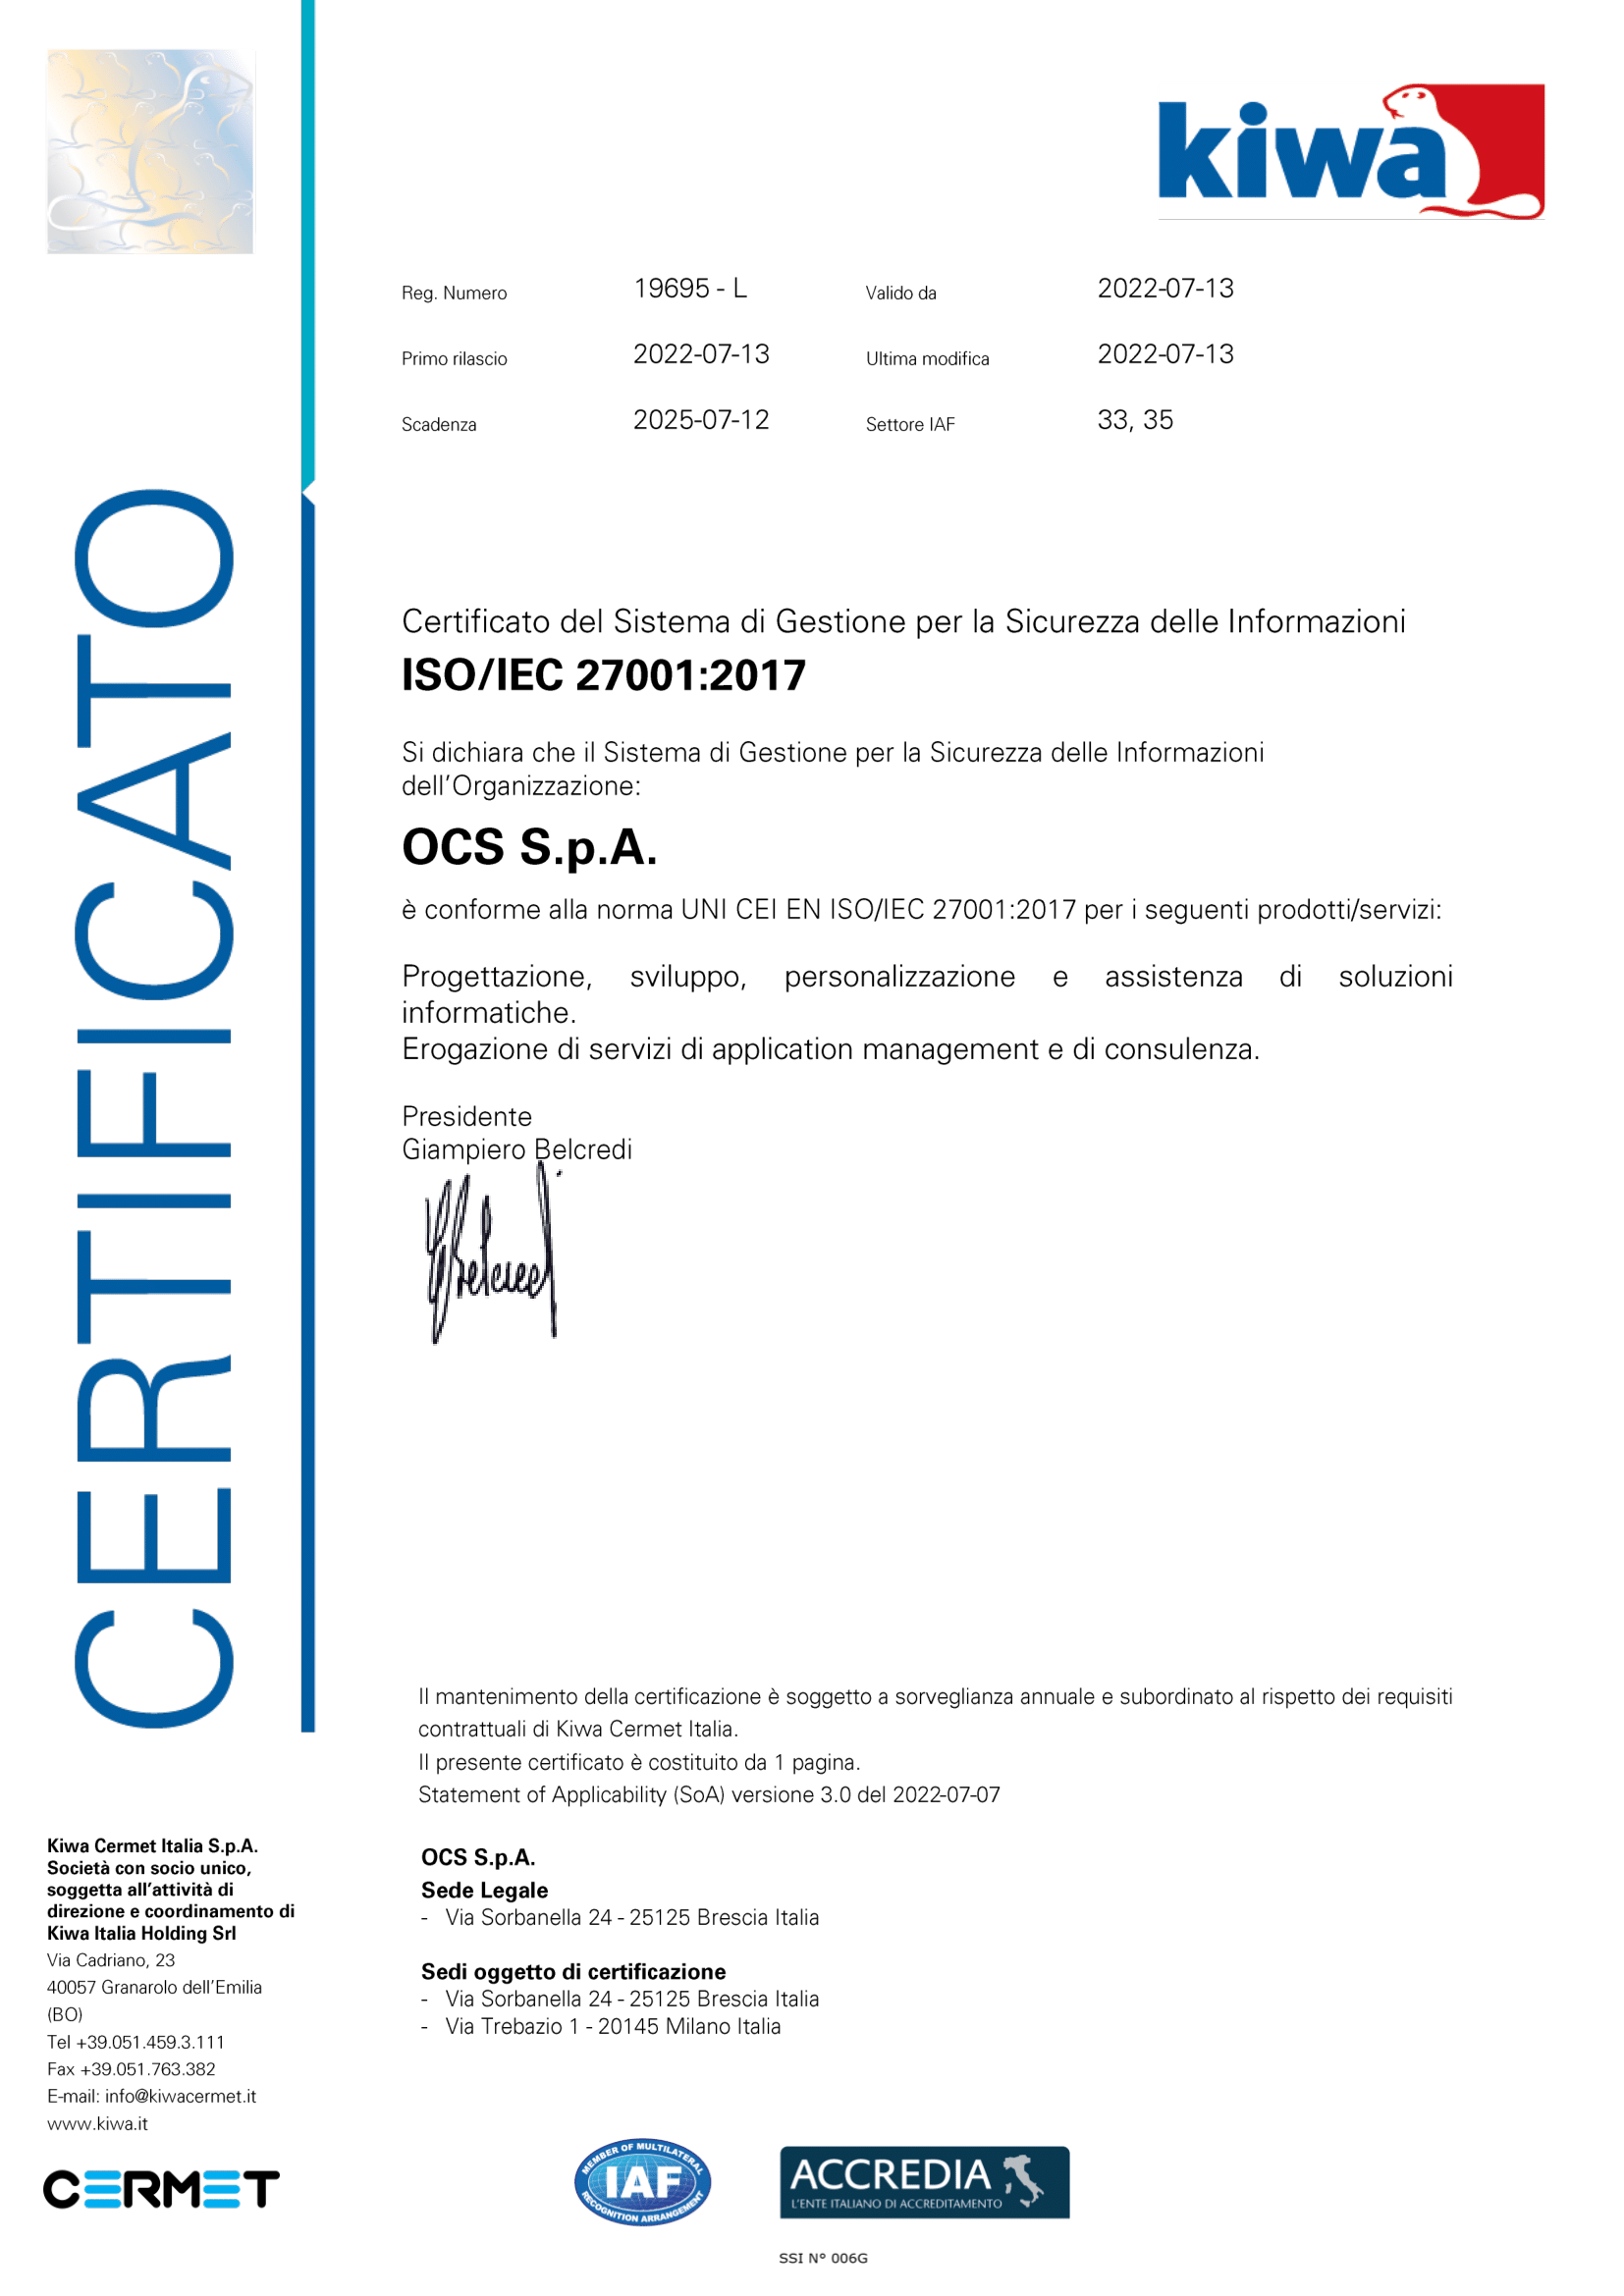 ISO 27001 Certificato OCS S.p.A.png